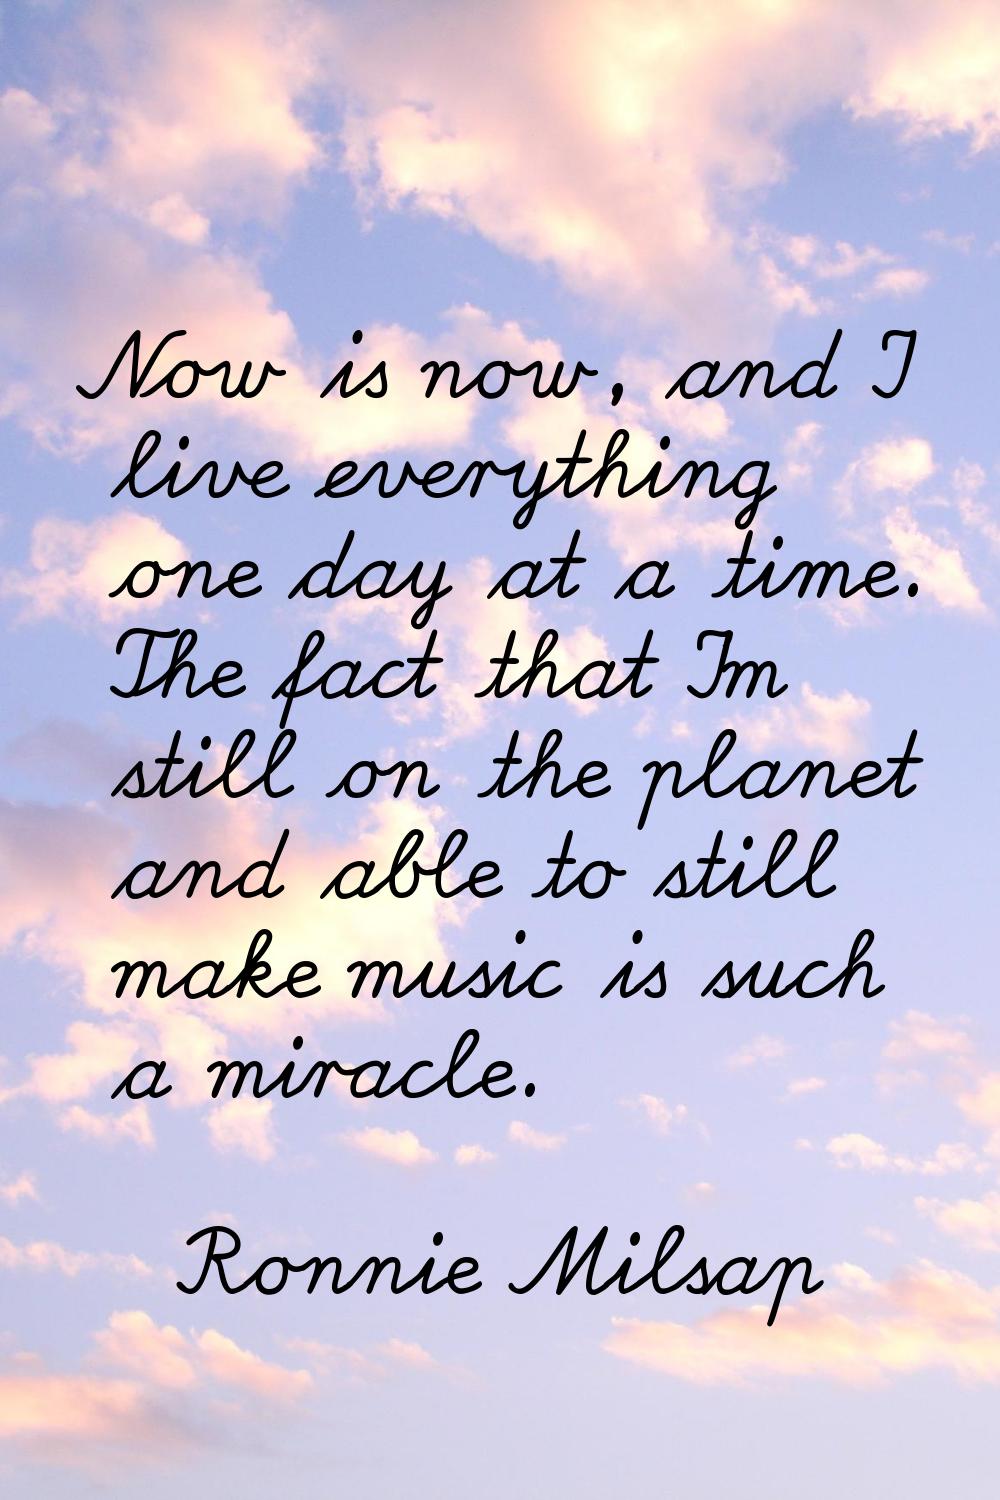 Now is now, and I live everything one day at a time. The fact that I'm still on the planet and able